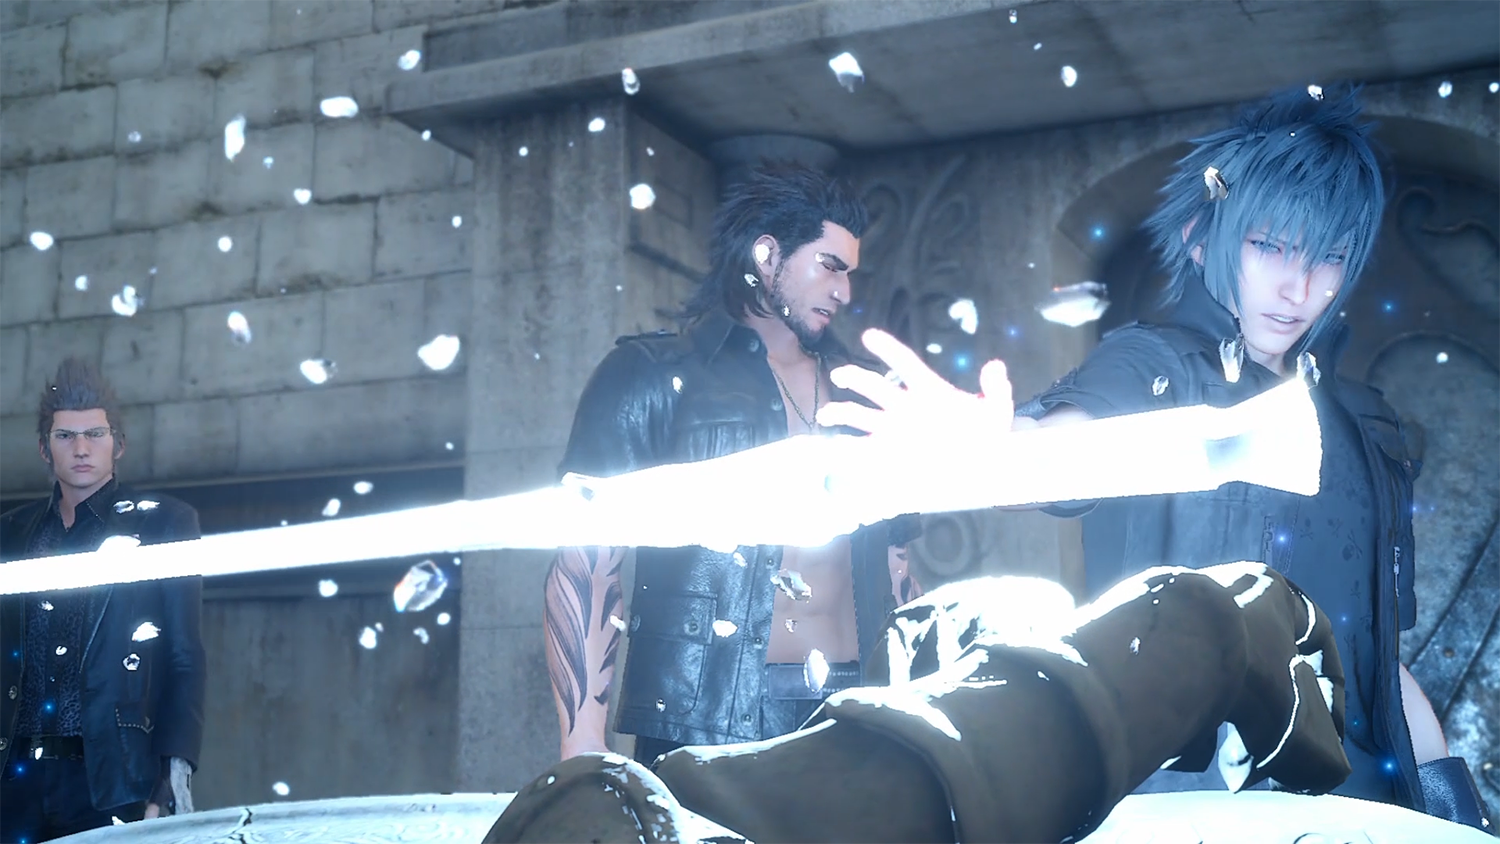 Noctis summoning a glowing sword in a dungeon.